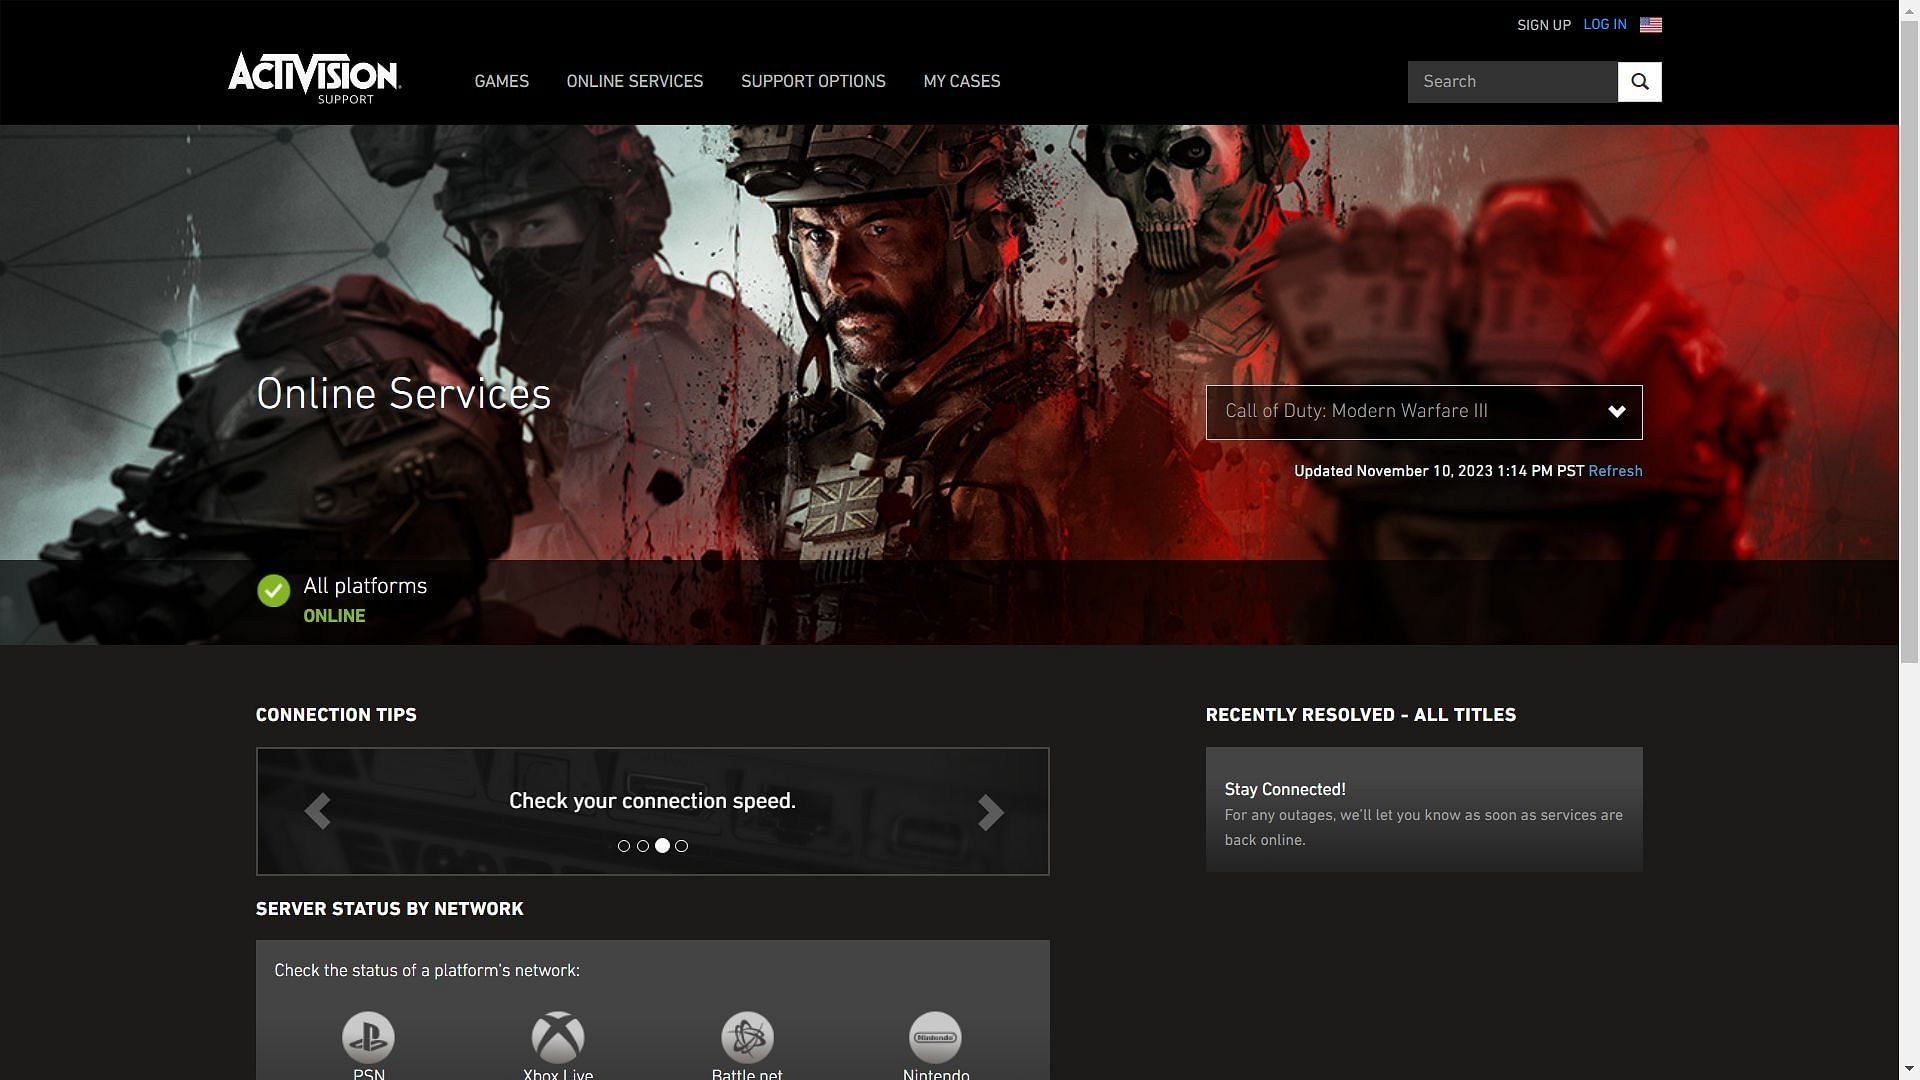 How to Check Activision Server Status for COD Games